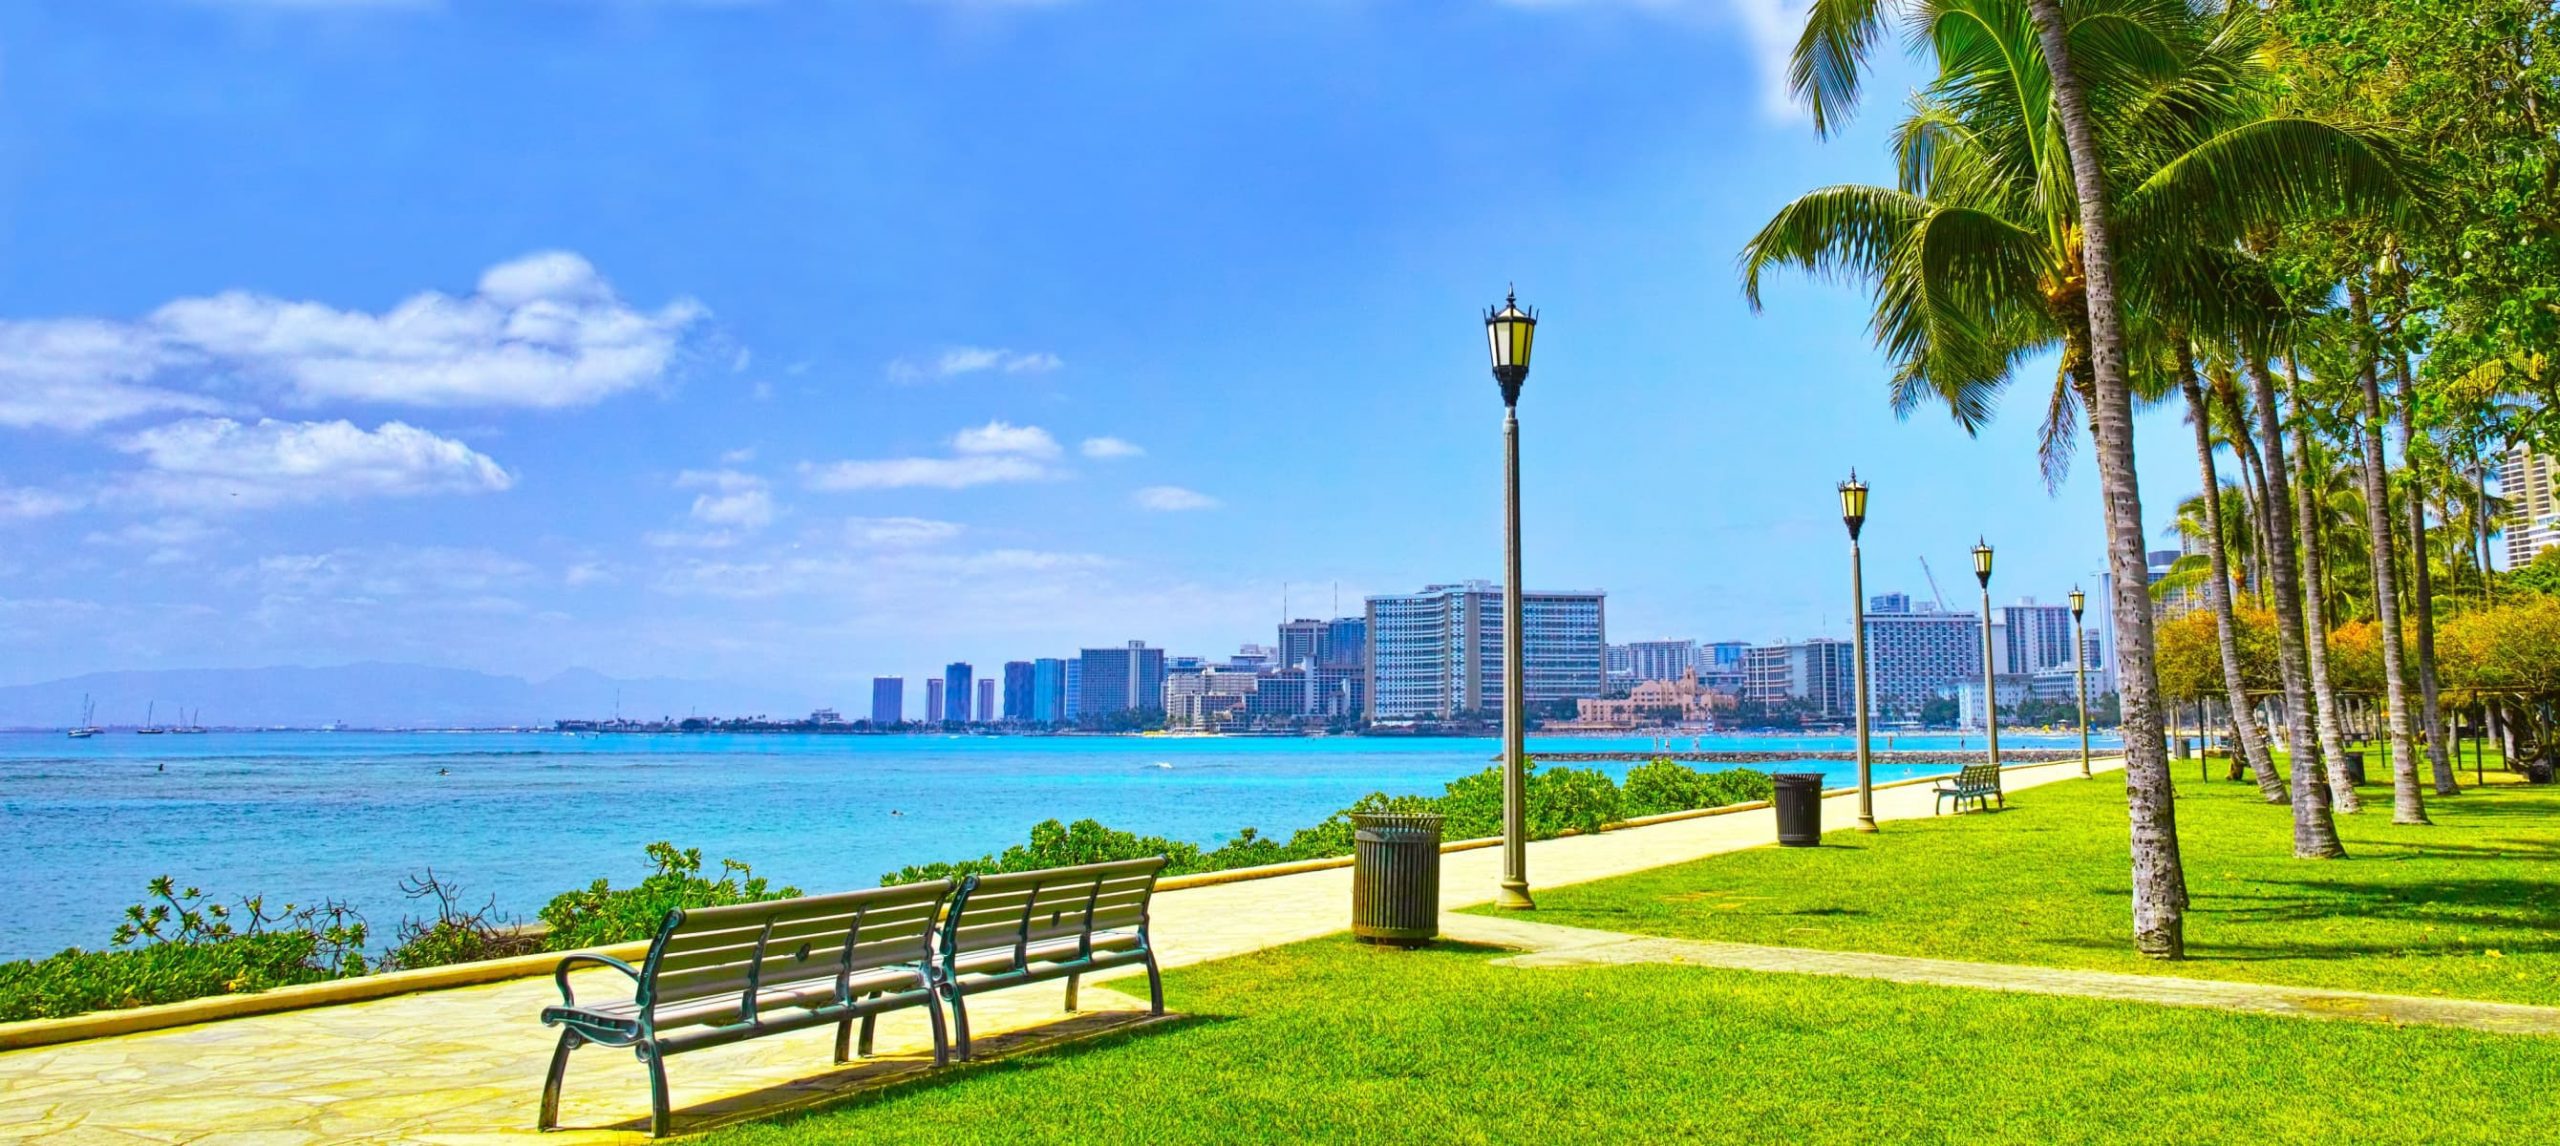 The Best Time To Visit Honolulu, Hawaii